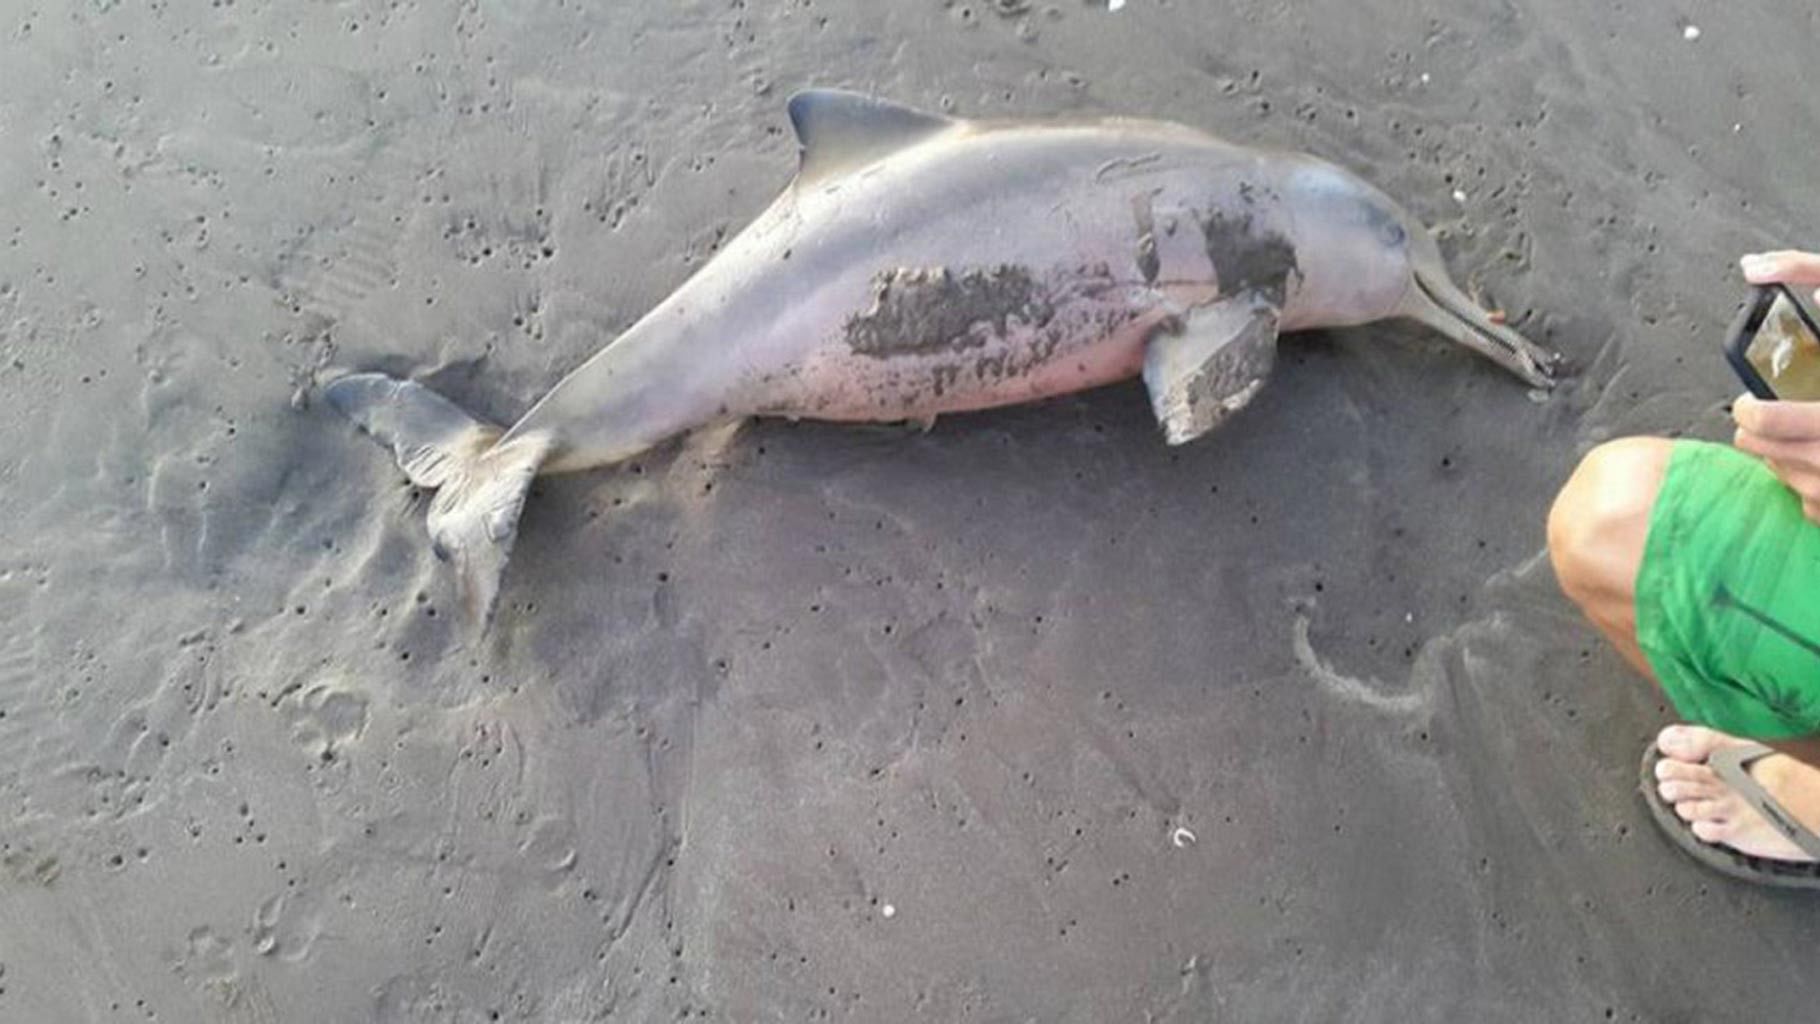 File photo of a baby dolphin left on the beach after it dies. (Photo: <a href="http://www.thesun.co.uk/sol/homepage/news/6938412/Shocking-moment-tourist-killed-baby-dolphin-by-parading-it-along-beach-so-holidaymakers-could-take-selfies.html">The Sun</a>)